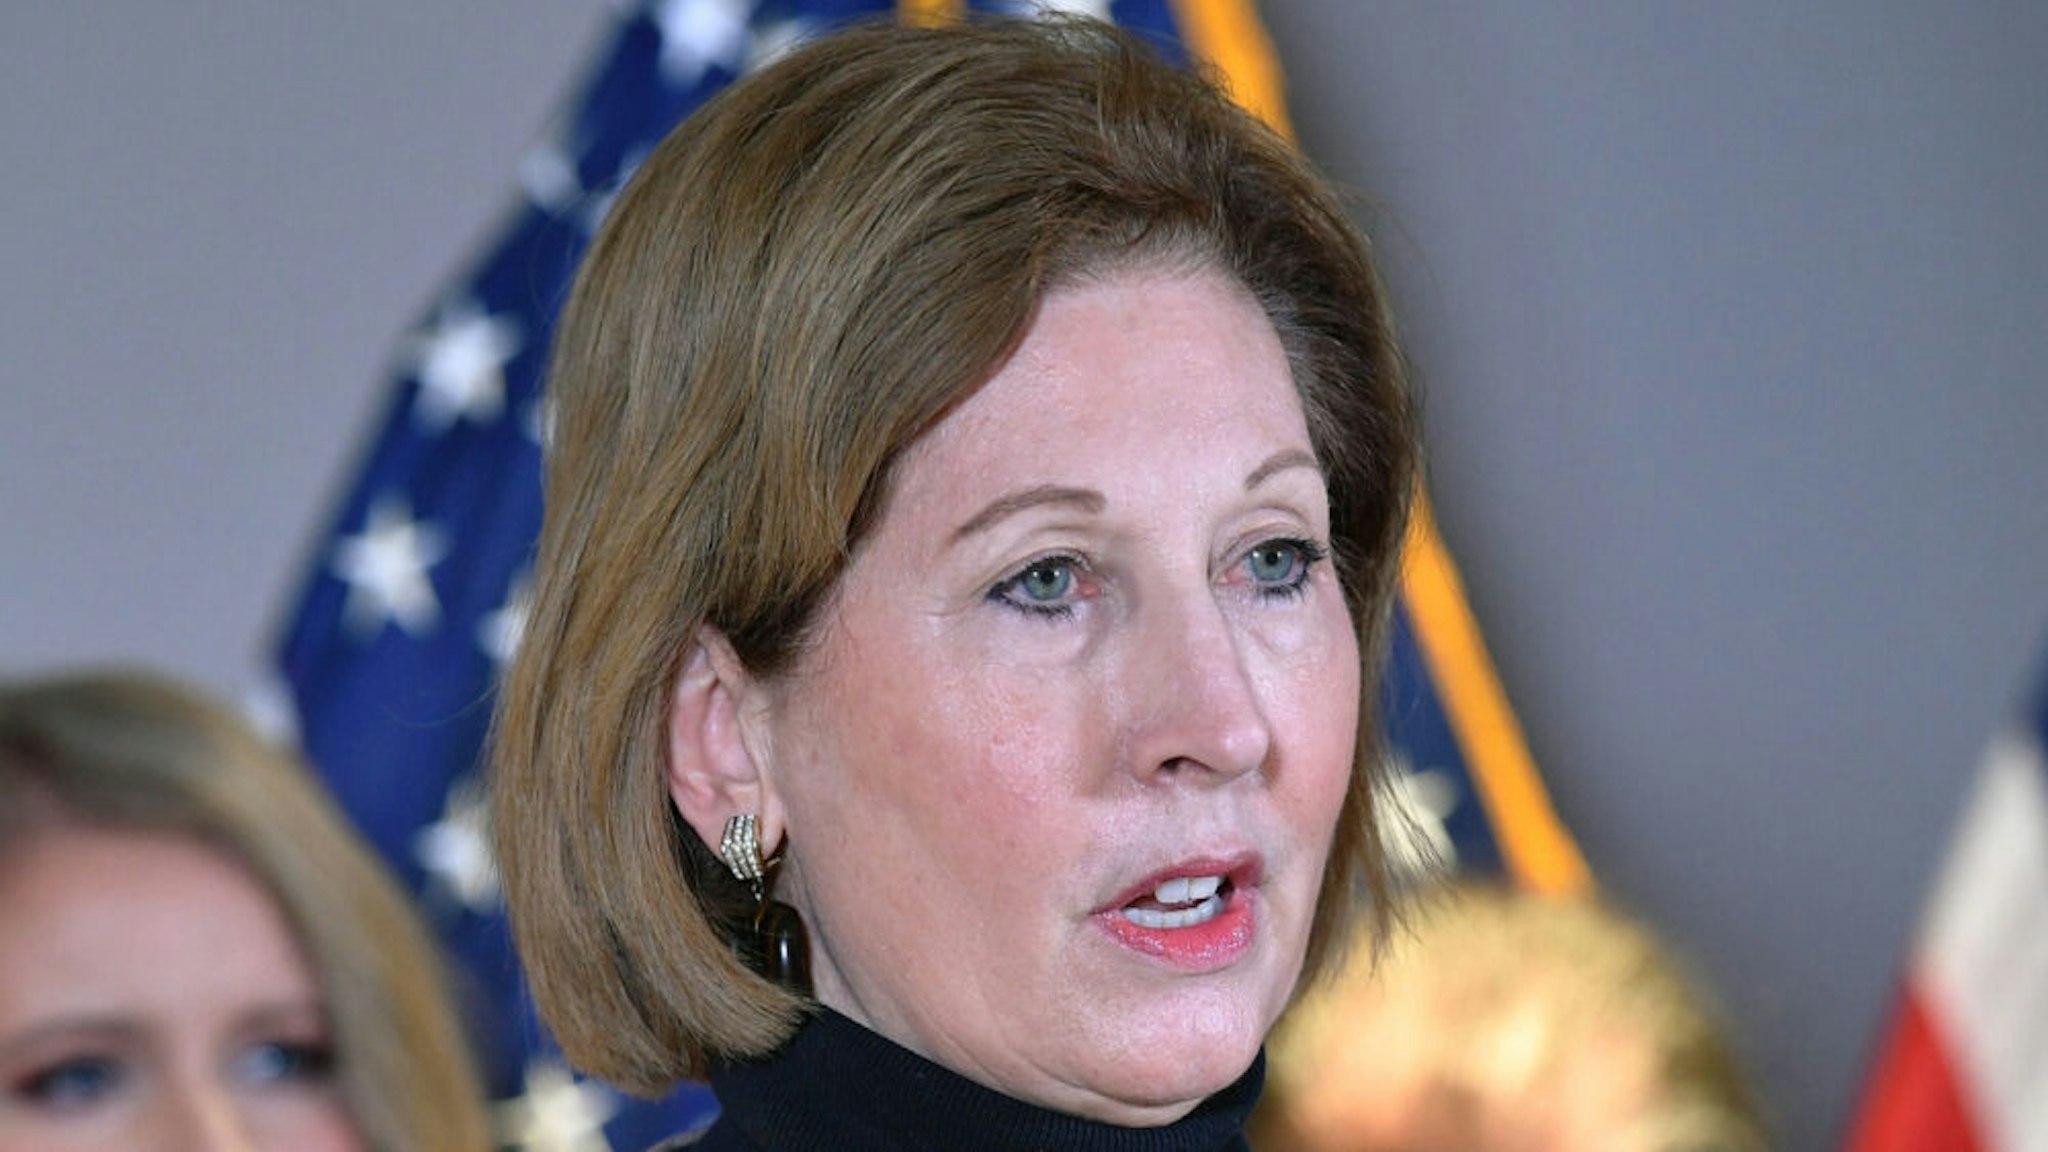 A November 19, 2020 photo shows Sidney Powell speaking during a press conference at the Republican National Committee headquarters in Washington, DC. - US President Donald Trump's personal lawyer Rudy Giuliani and campaign lawyer Jenna Ellis reportedly said that Powell is not a member of the Trump legal team.